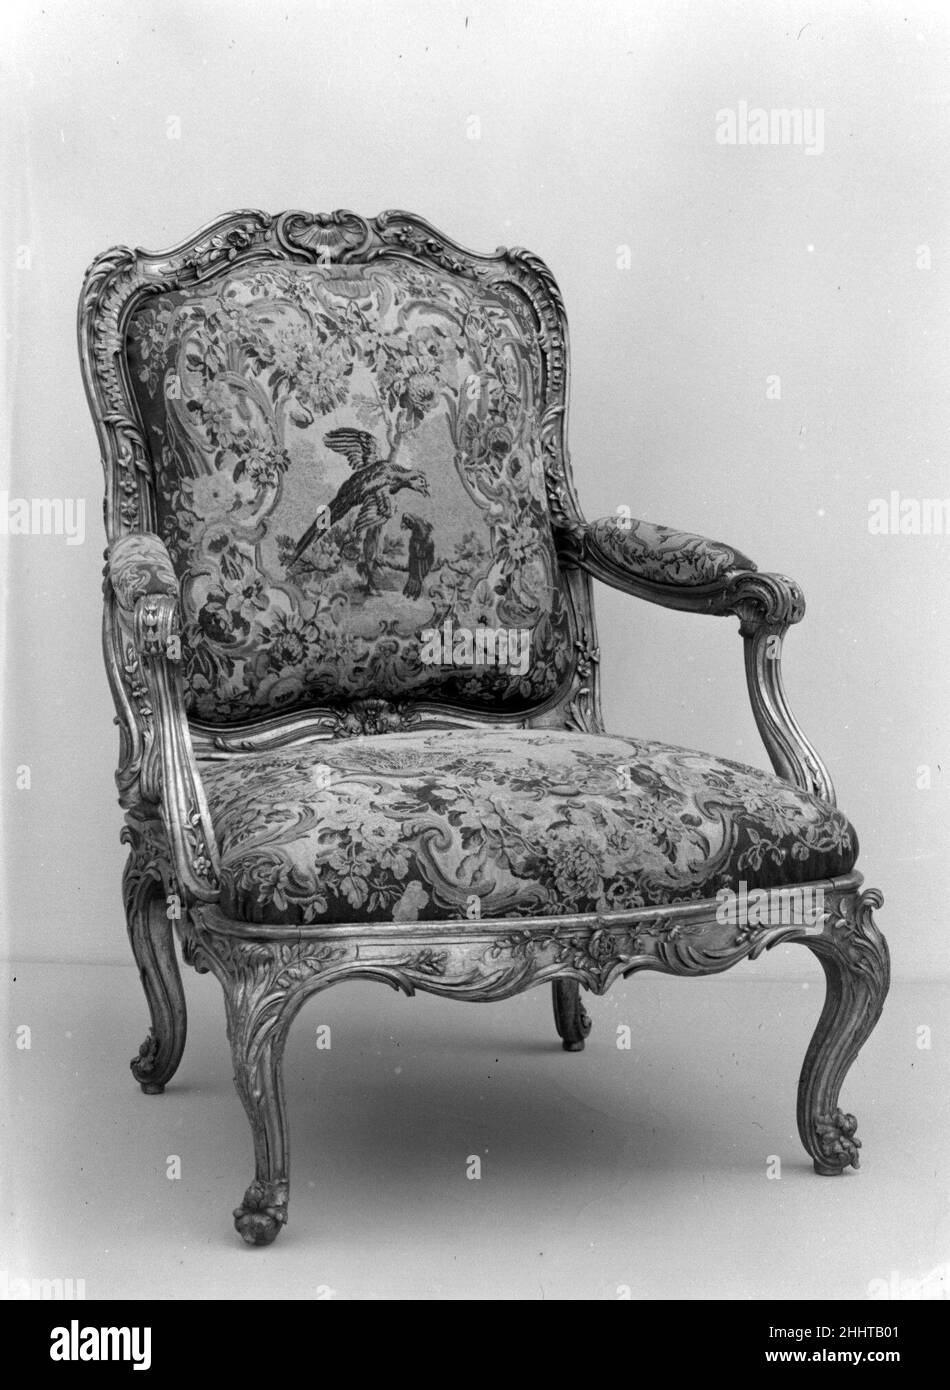 Armchair (part of a set) ca. 1754–56 Frame by Nicolas-Quinibert Foliot This piece is part of a set of twelve armchairs and two settees ordered in Paris in 1753 by Baron Johann Ernst Bernstorff, Danish ambassador to the court of Versailles between 1744 and 1751. After returning to Denmark, Bernstorff commissioned this seat furniture for the tapestry room of his new residence in Copenhagen that was hung with four wall tapestries of the Amours des Dieux series woven at the Beauvais Manufactory. This chair illustrates how French furniture and furnishings were imported all over Europe for the enric Stock Photo